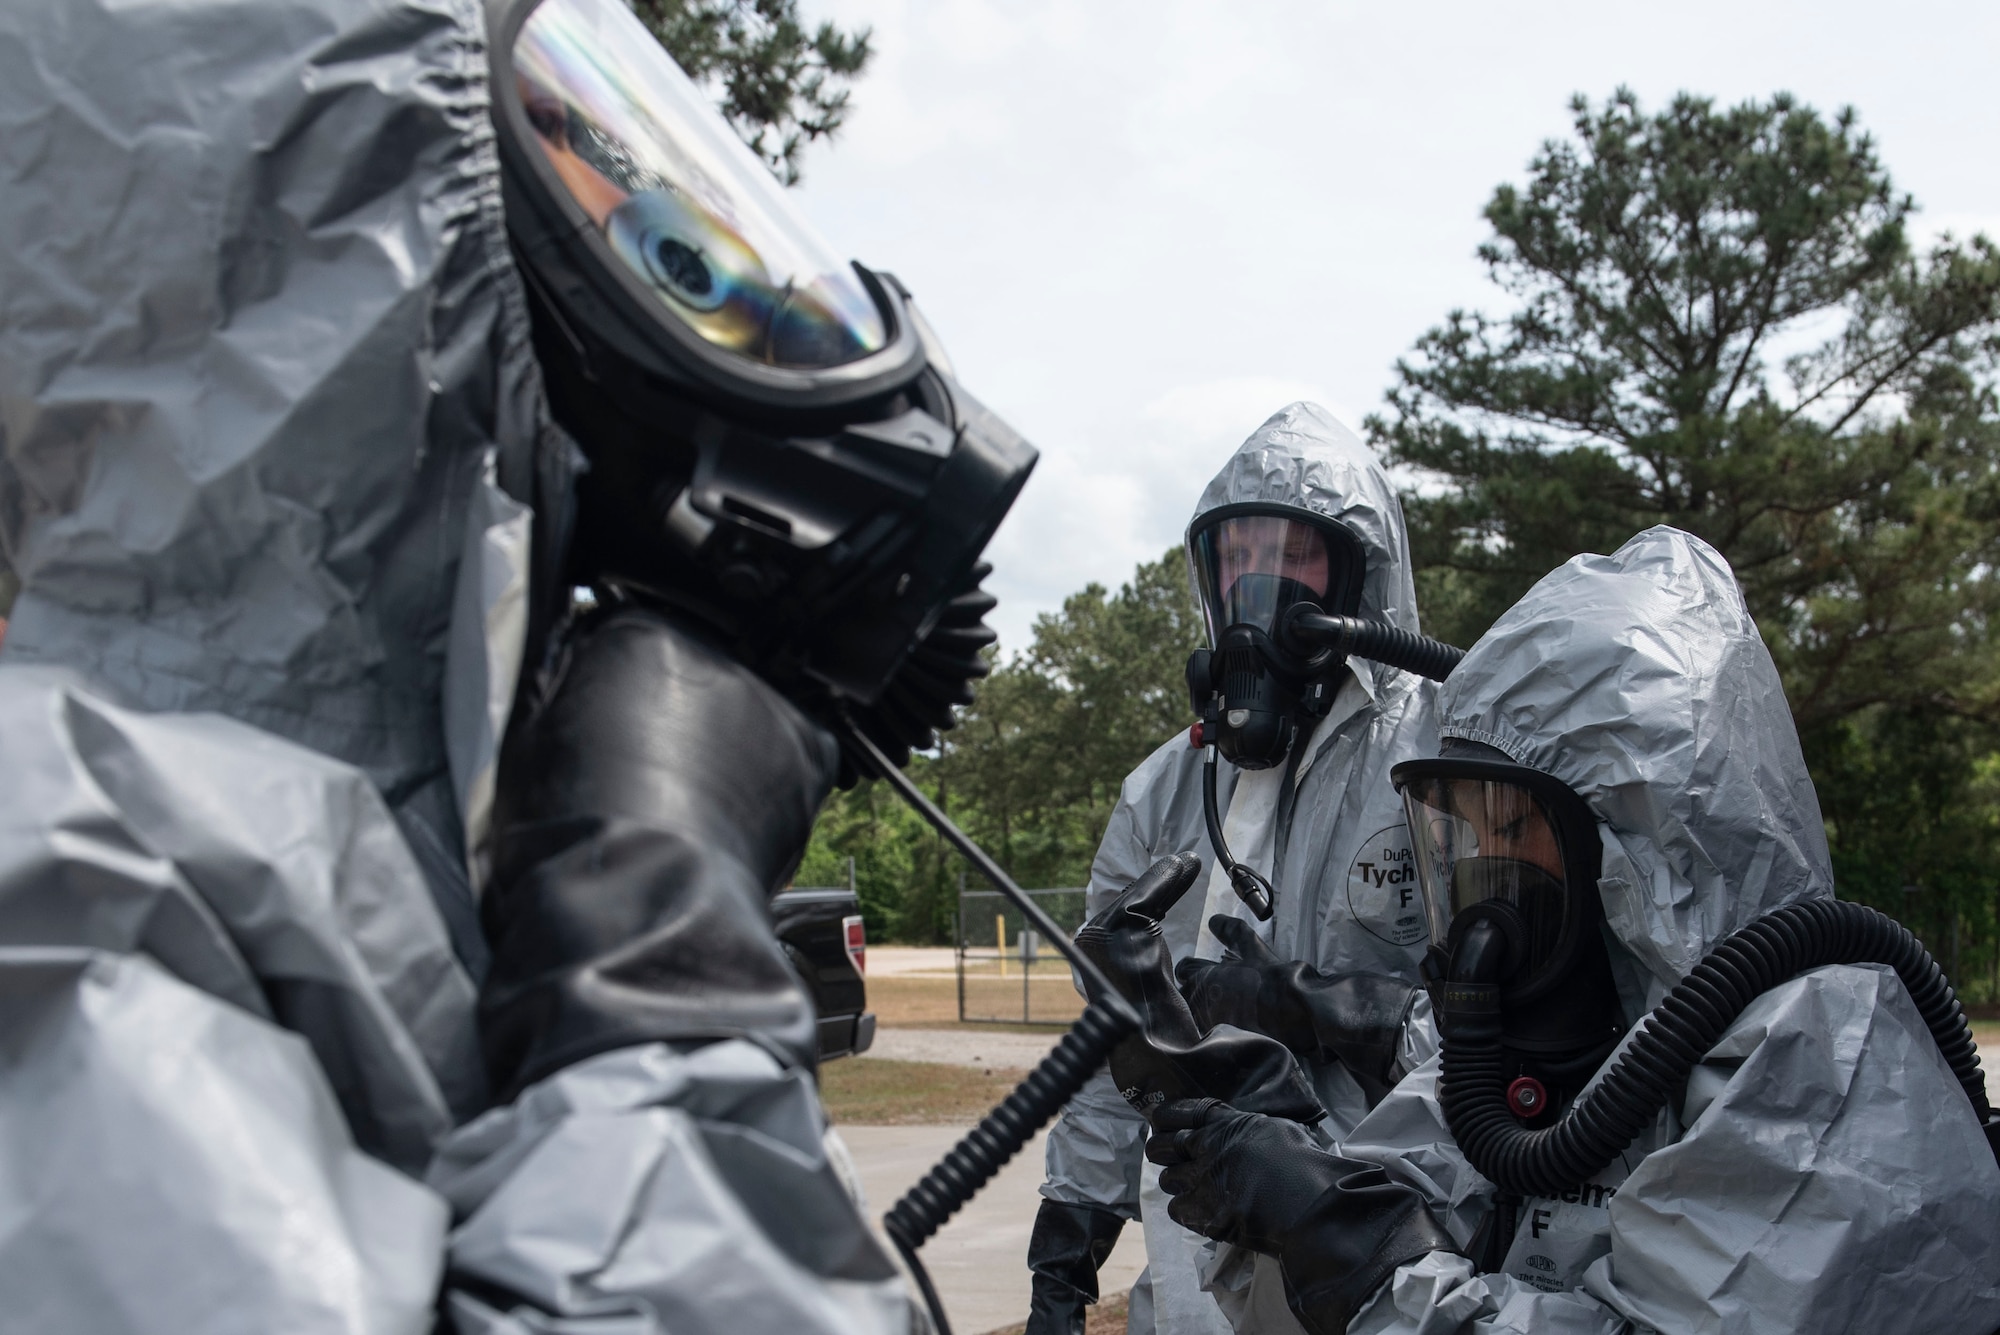 U.S. Air Force emergency management technicians assigned to the 20th Civil Engineer Squadron suit up during an exercise at Shaw Air Force Base, S.C., May 2, 2019.